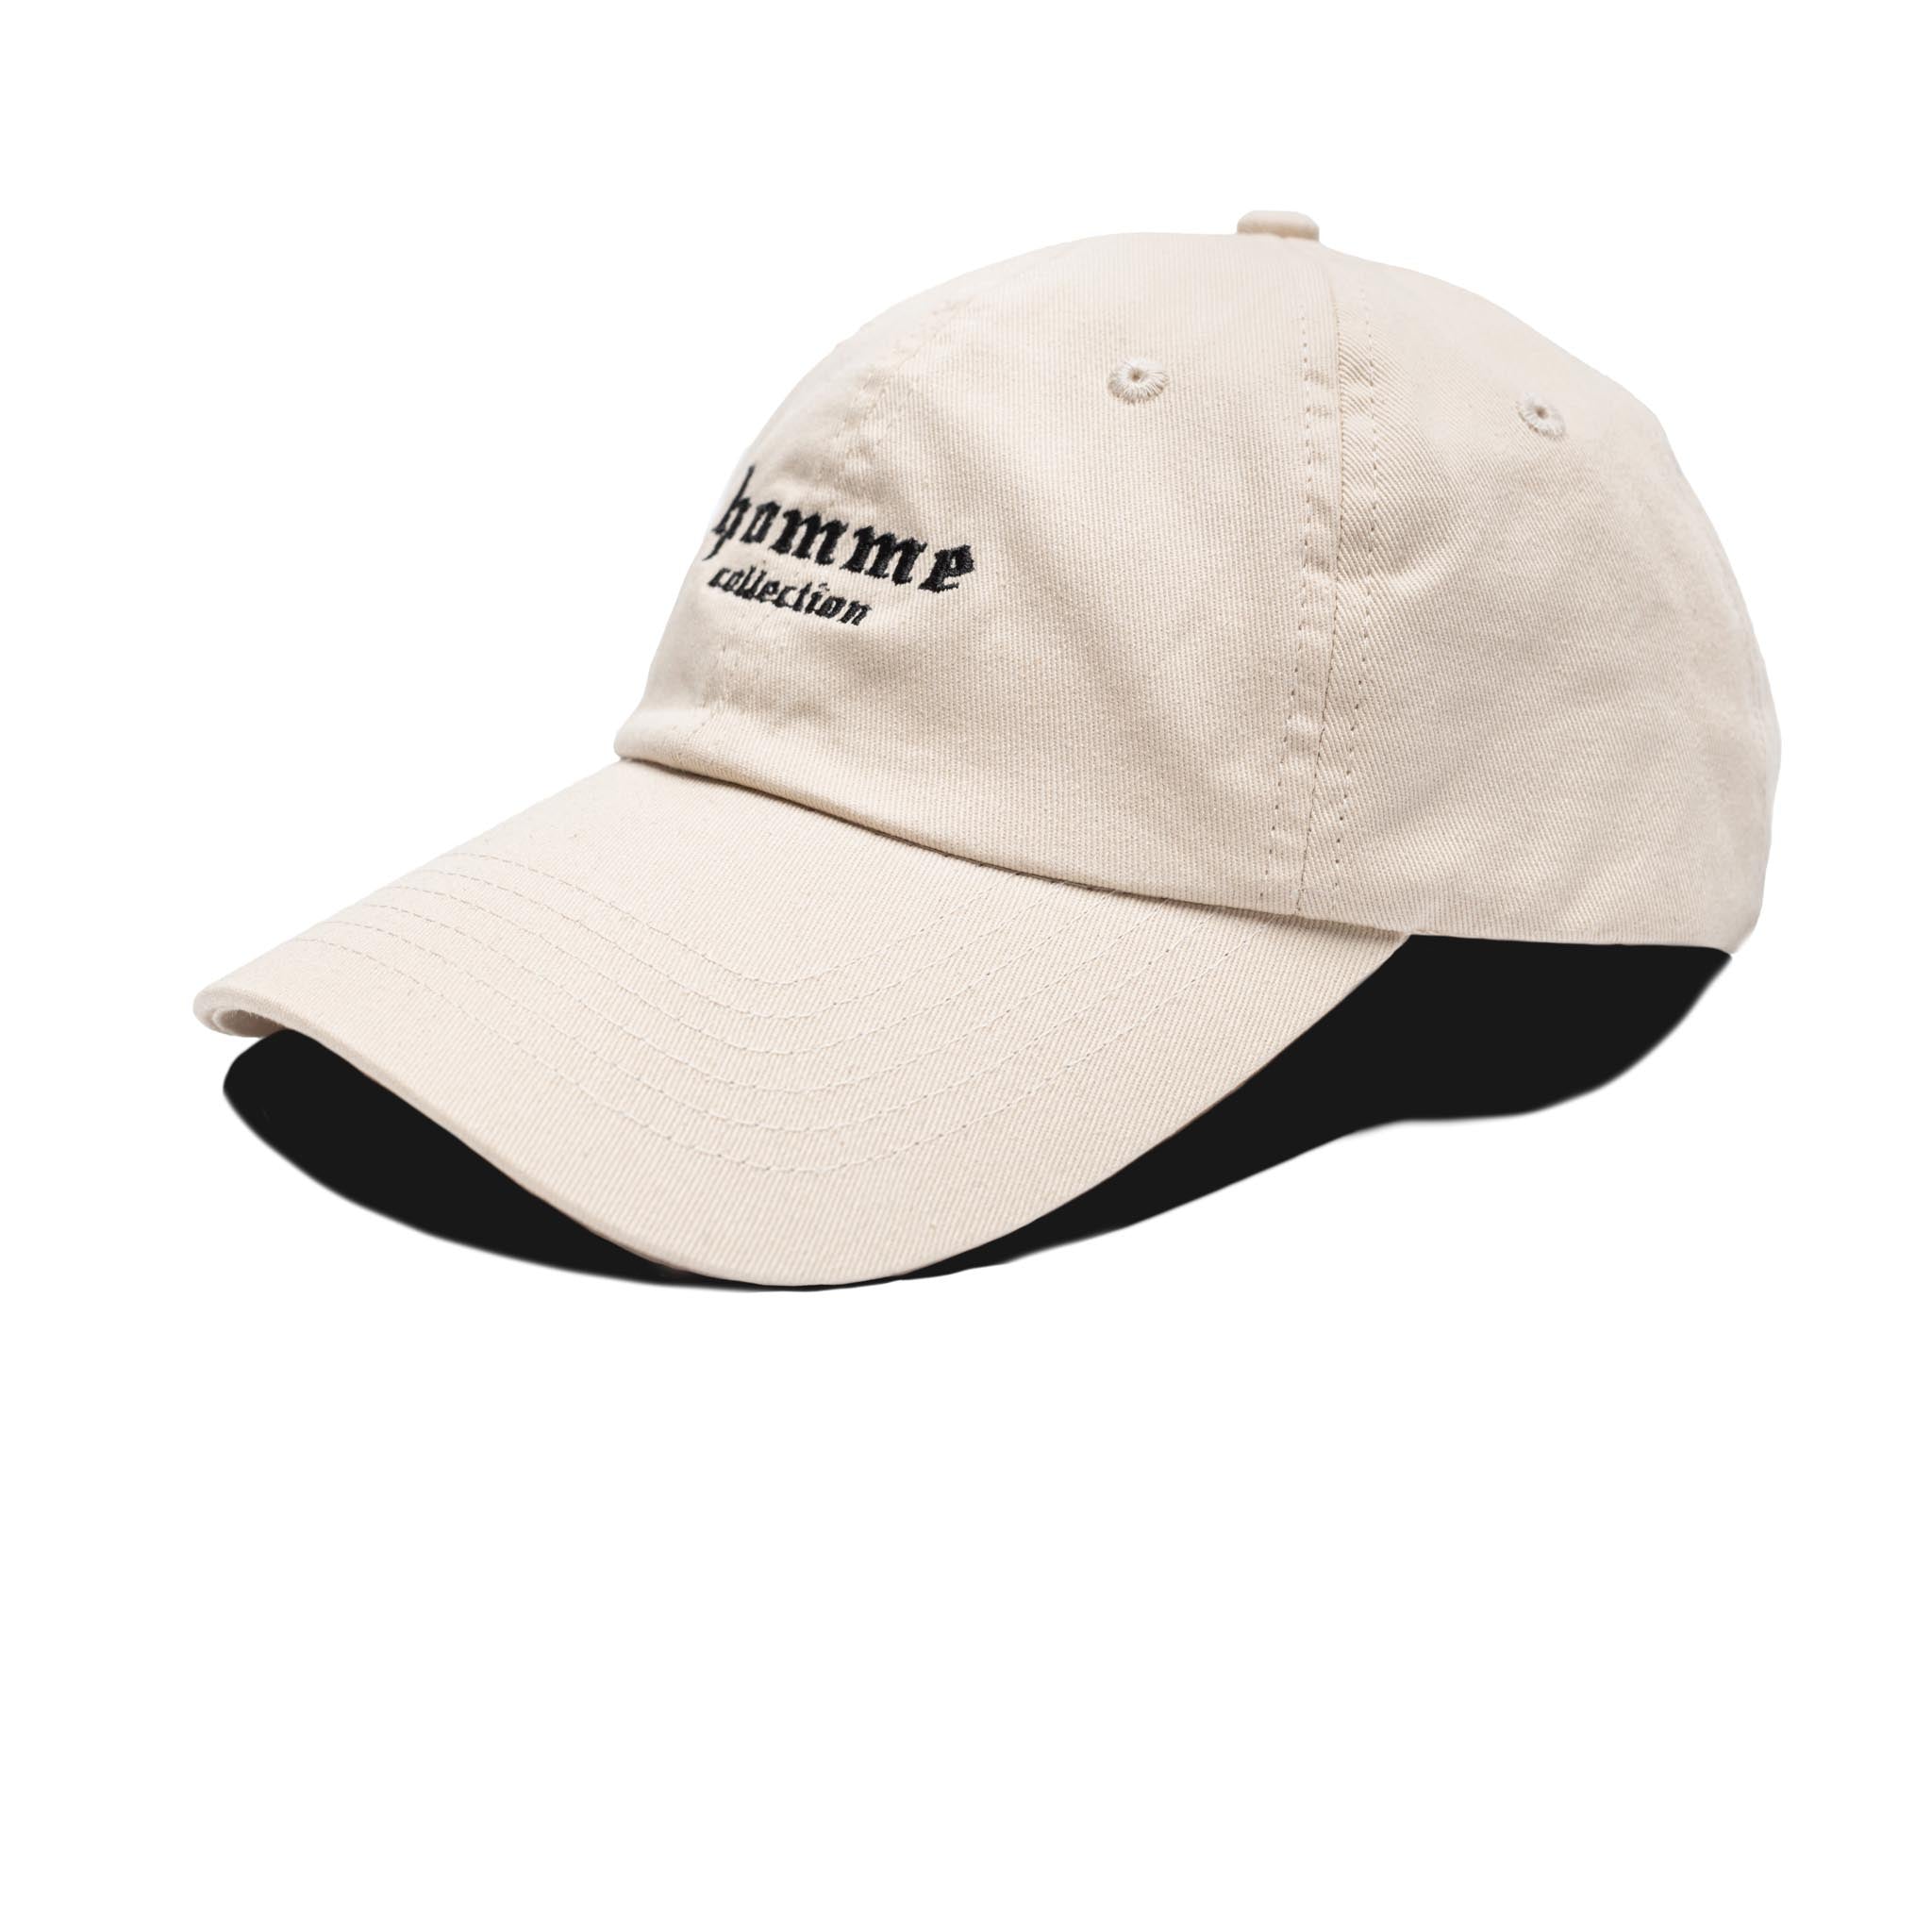 HOMME+ Embroidered Cap Sand